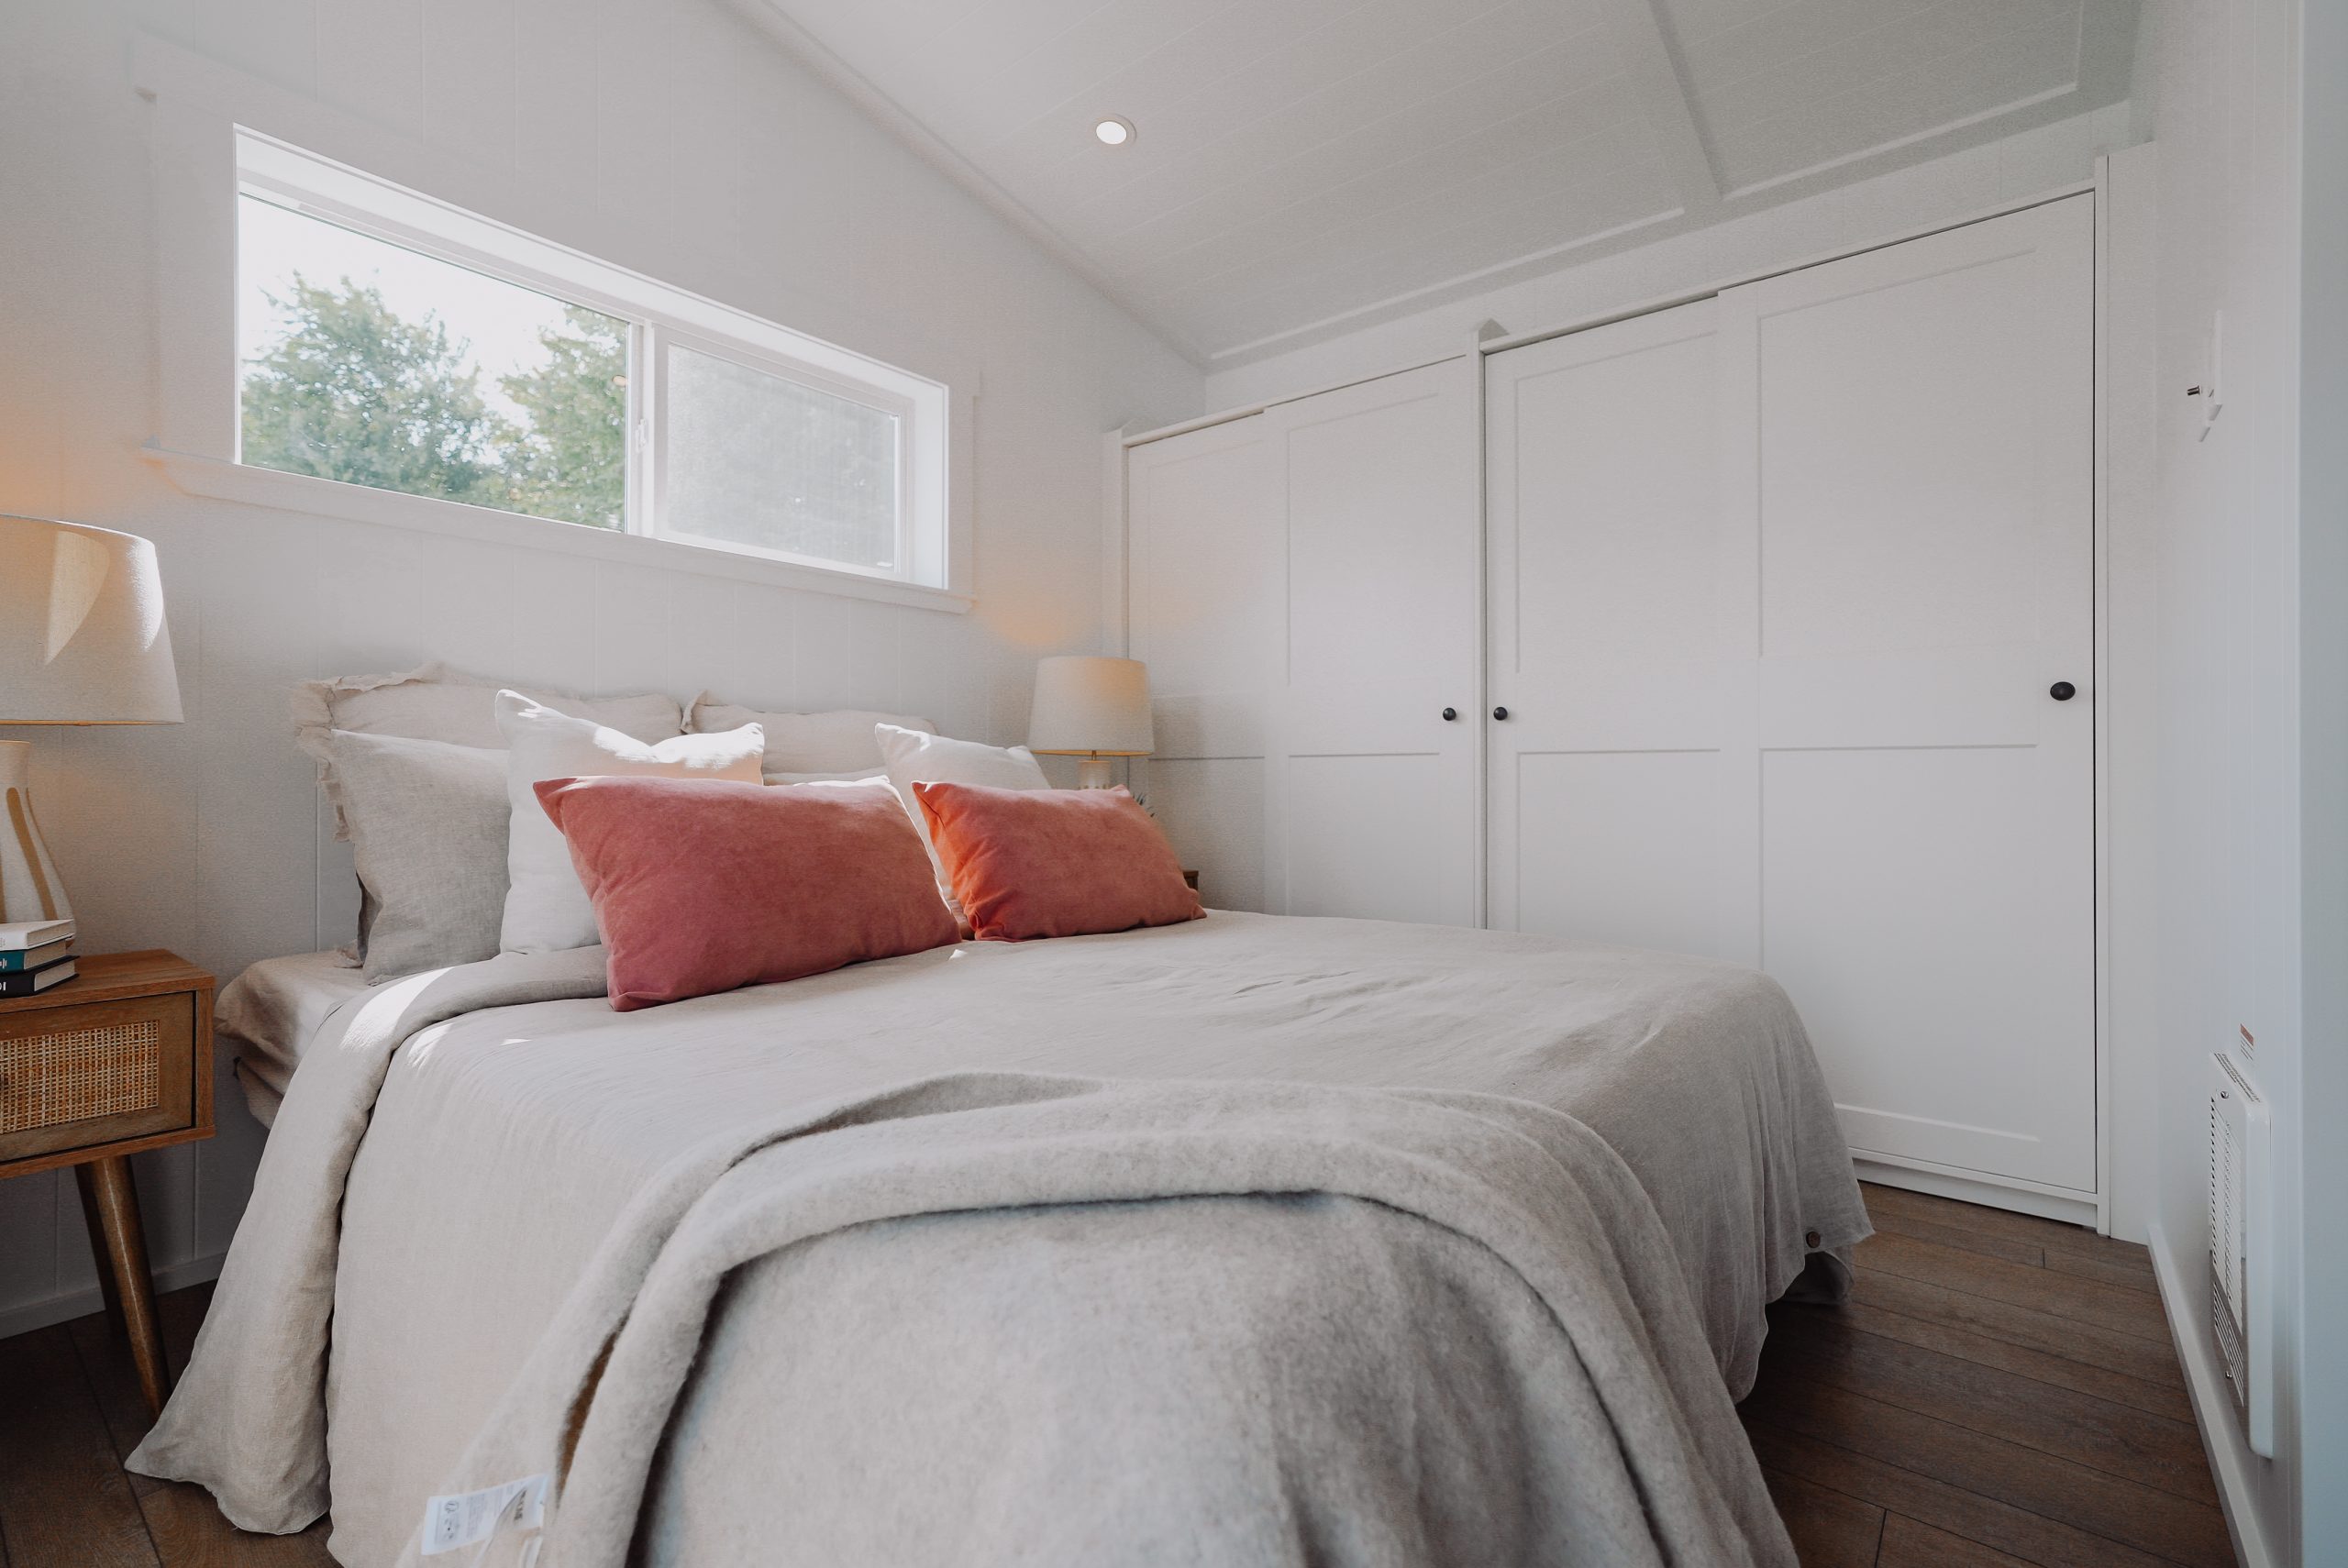 Need a Tiny House With a Downstairs Bedroom? Need a Tiny House With TWO Downstairs Bedrooms?